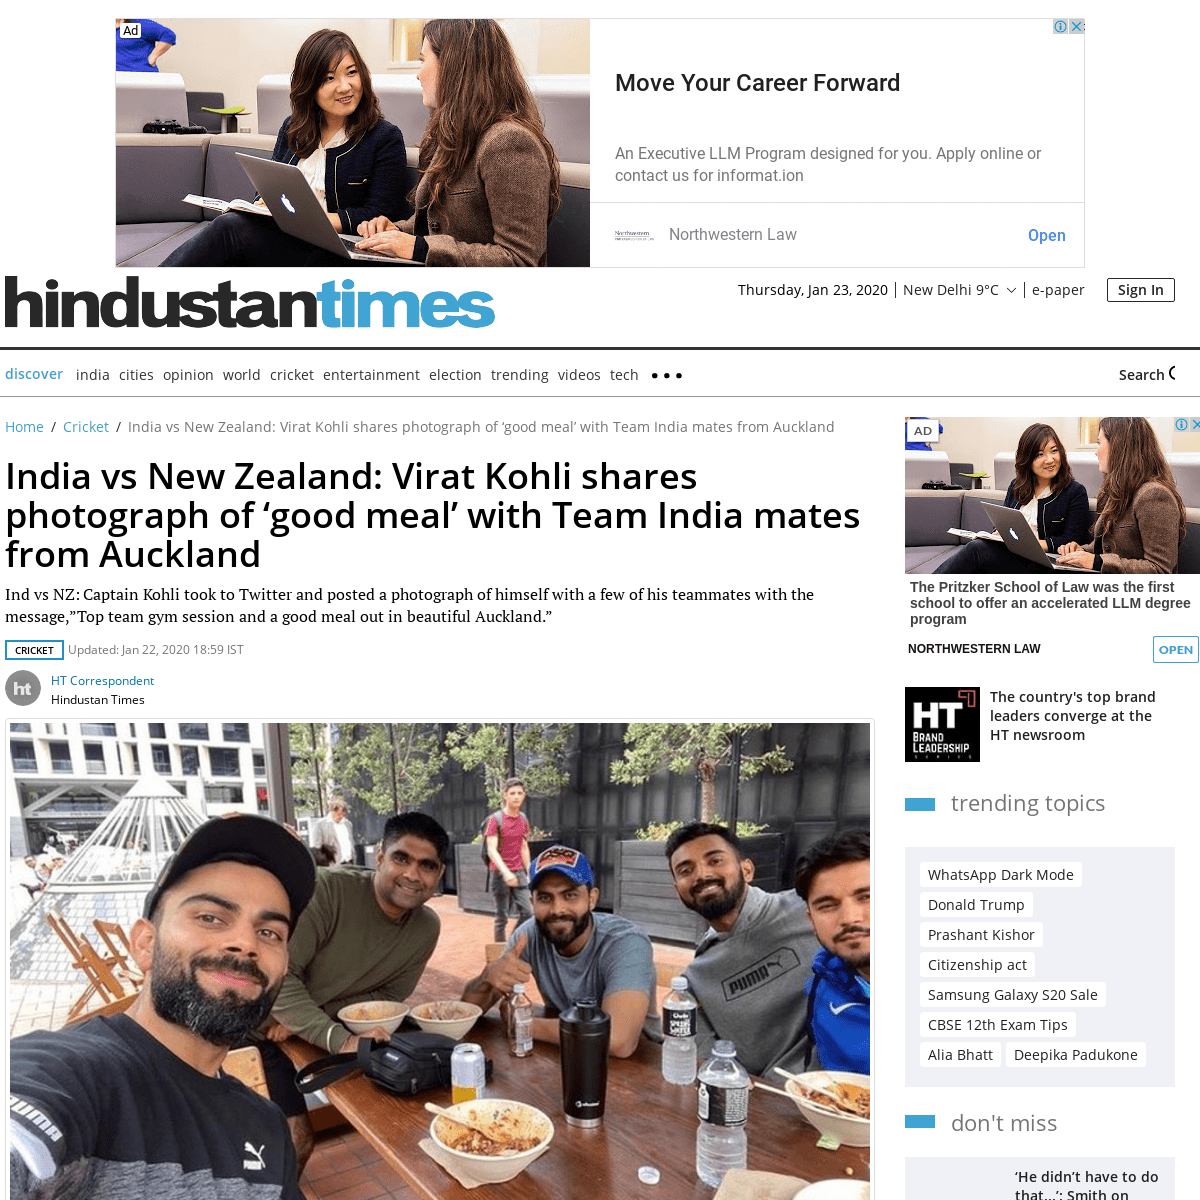 A complete backup of www.hindustantimes.com/cricket/india-vs-new-zealand-virat-kohli-shares-photograph-of-good-meal-with-team-in